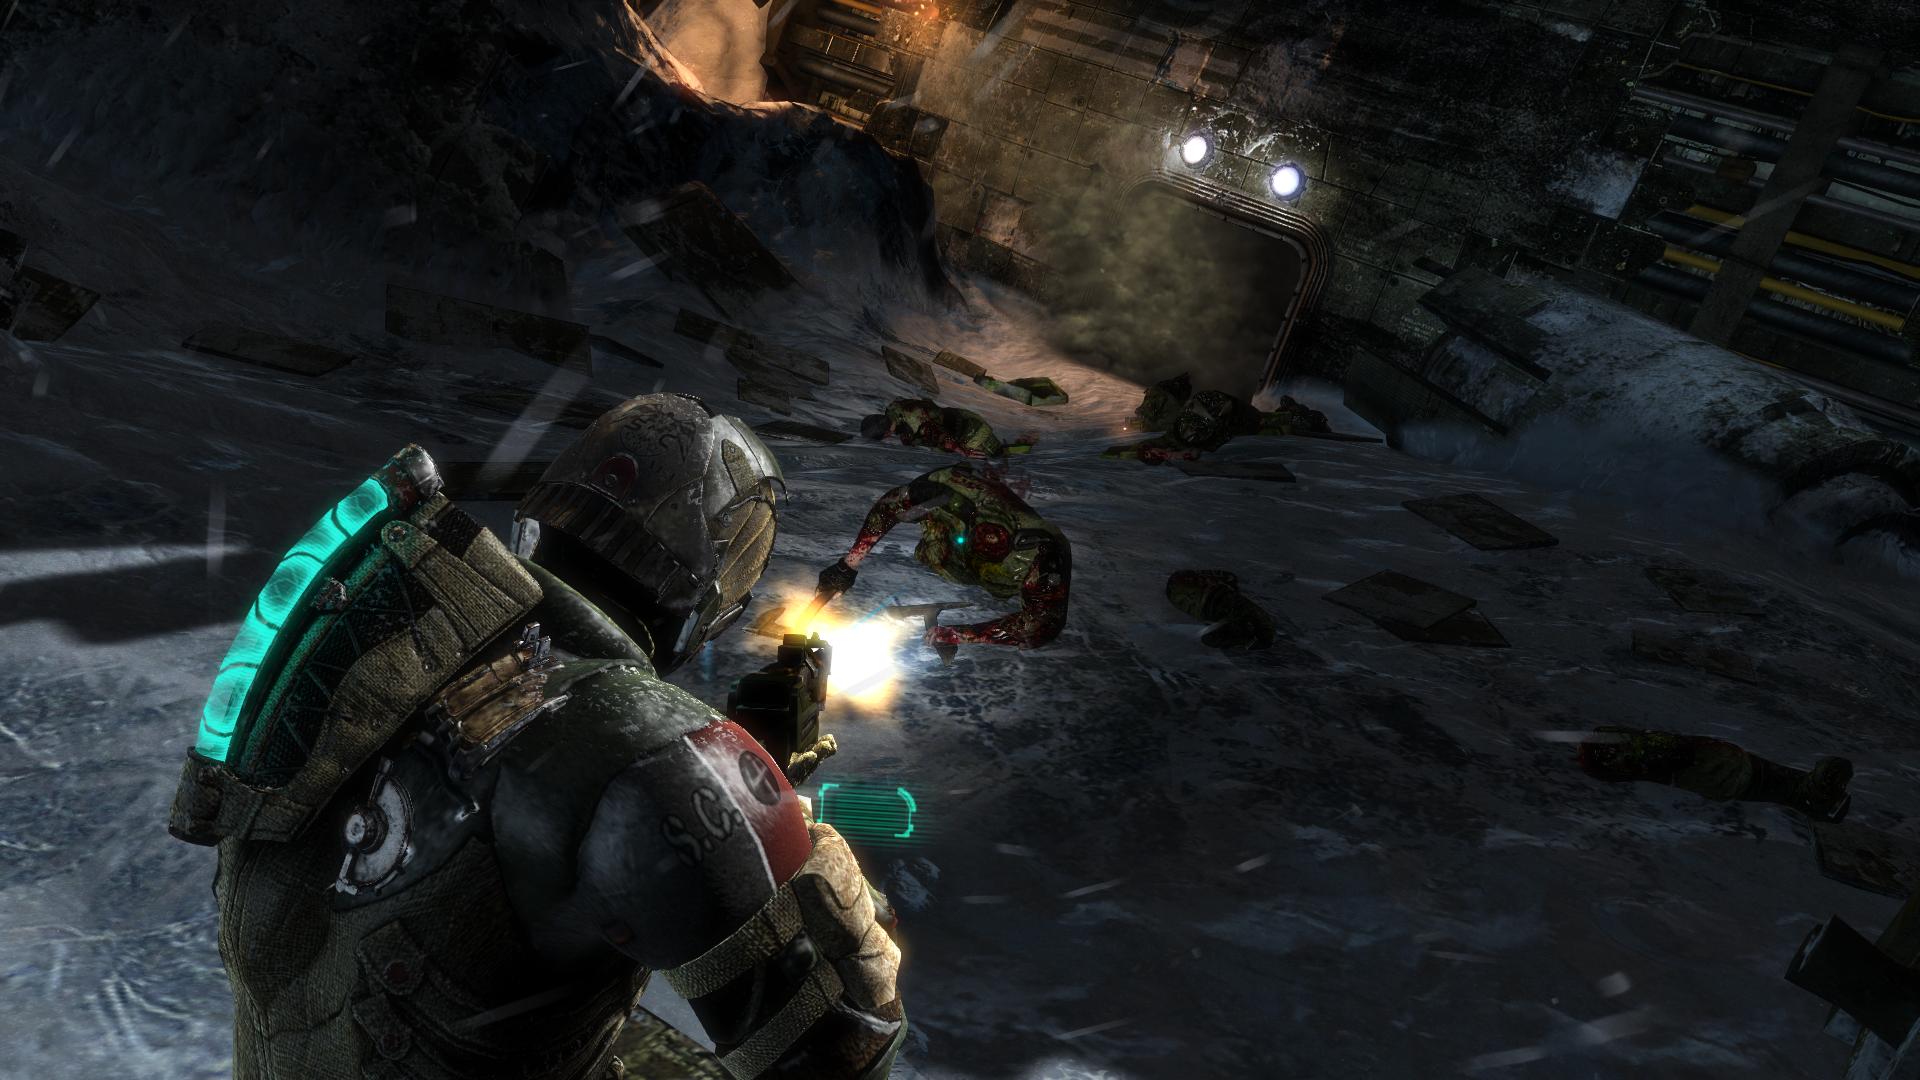 deadspace3 2013-02-13 22-48-08-00